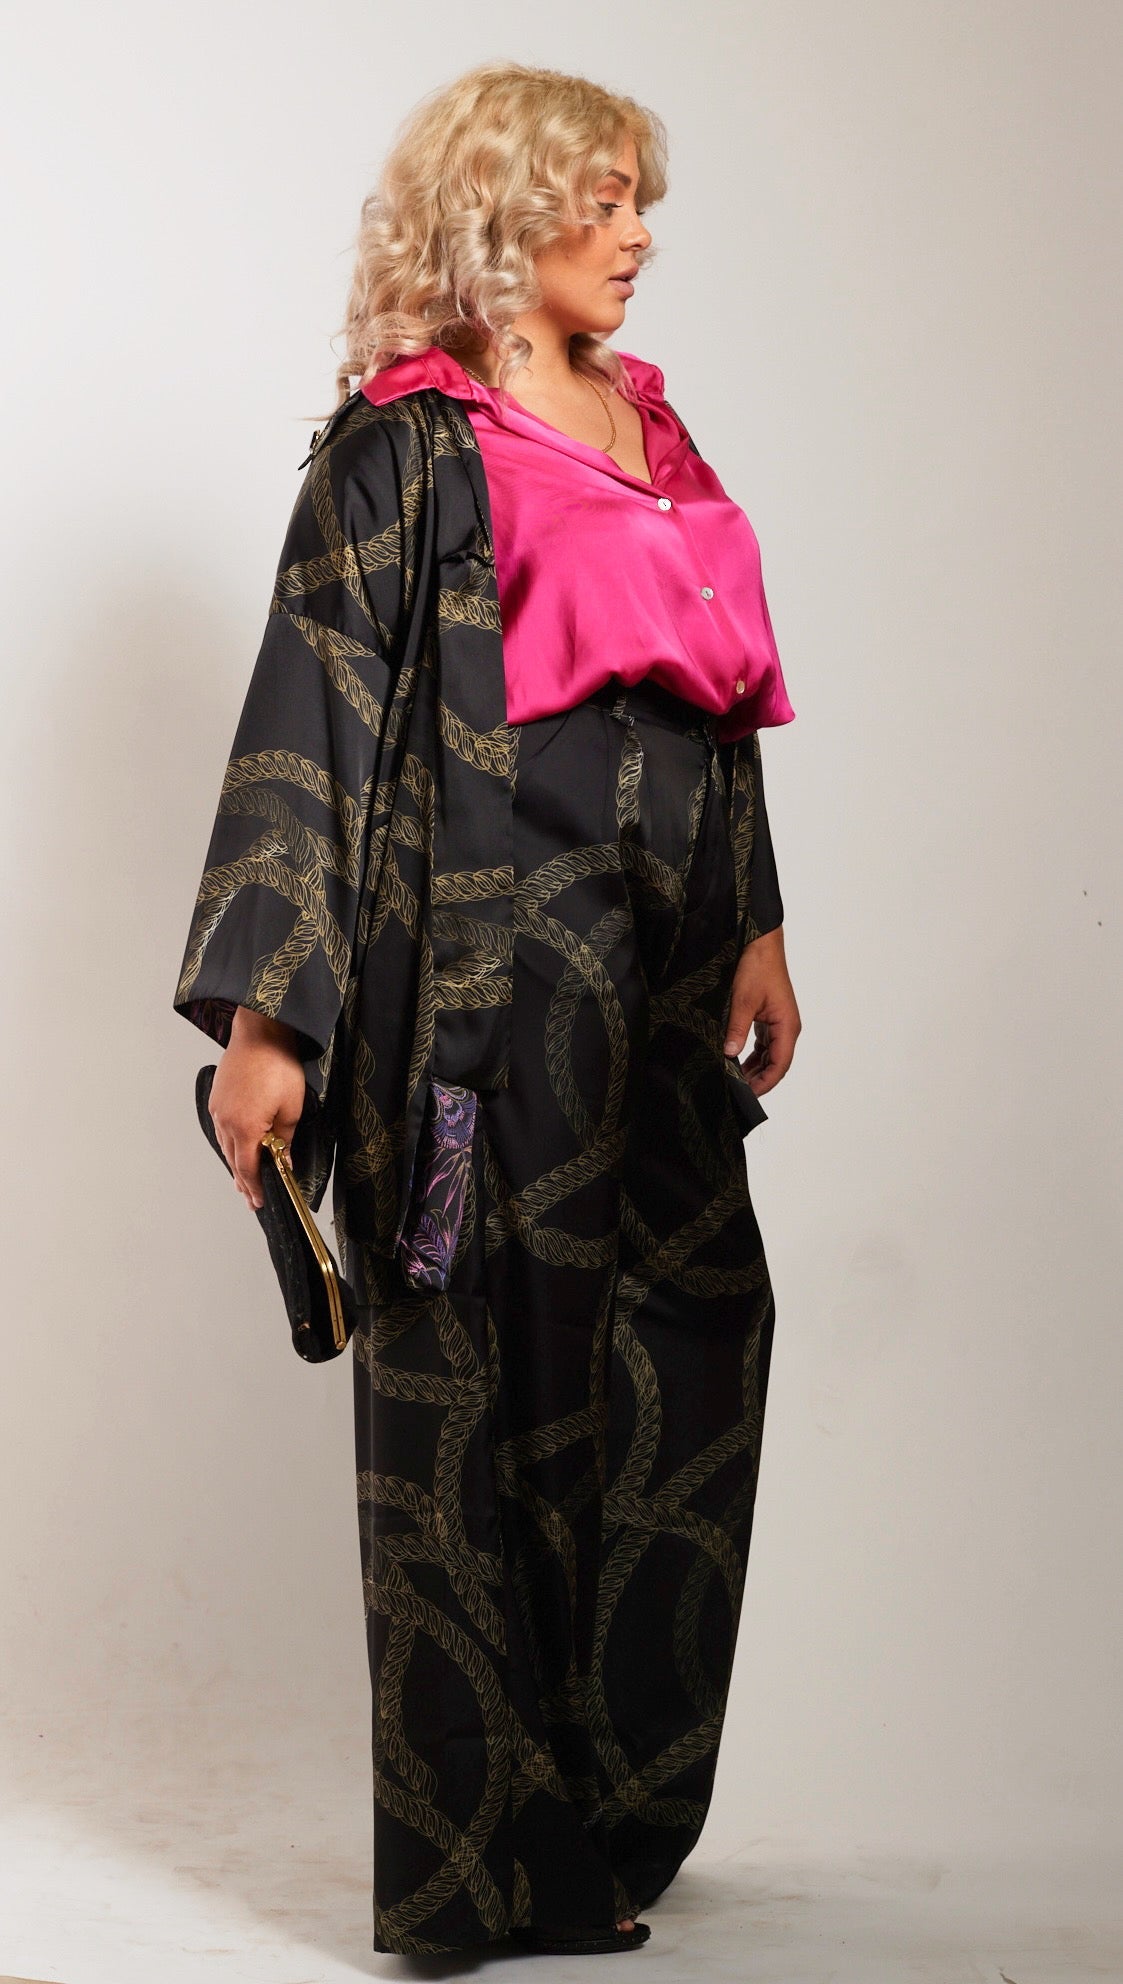 side profile woman modelling black and gold chains printed kimono duster with matching yacht slacks holding a clutch purse